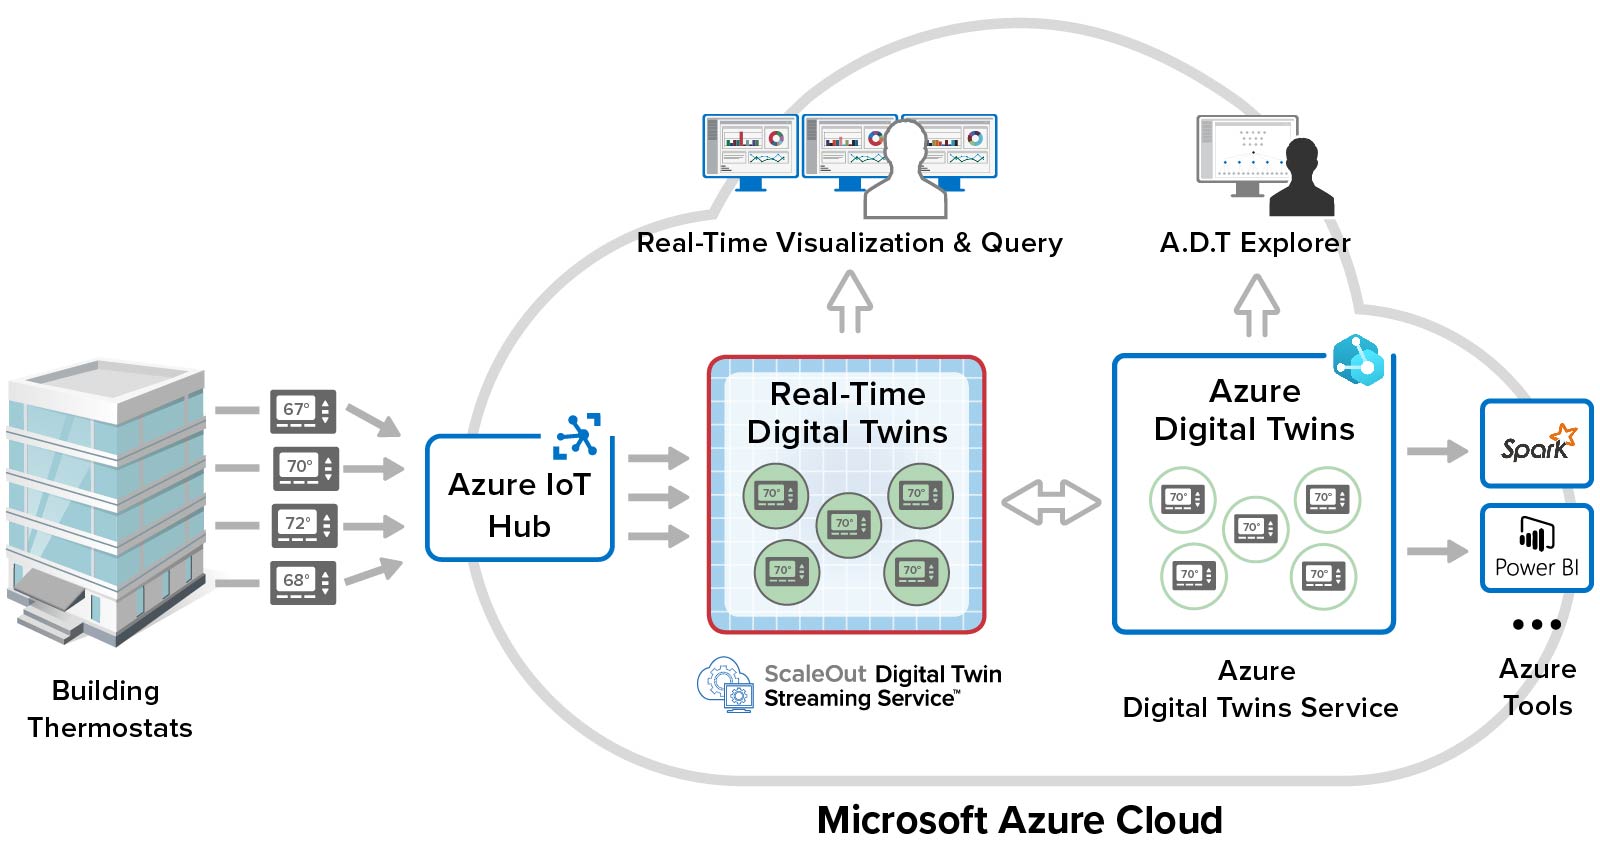 Ecosystem of Azure tools available by combining Azure Digital Twins with the ScaleOut Digital Twin Streaming Service